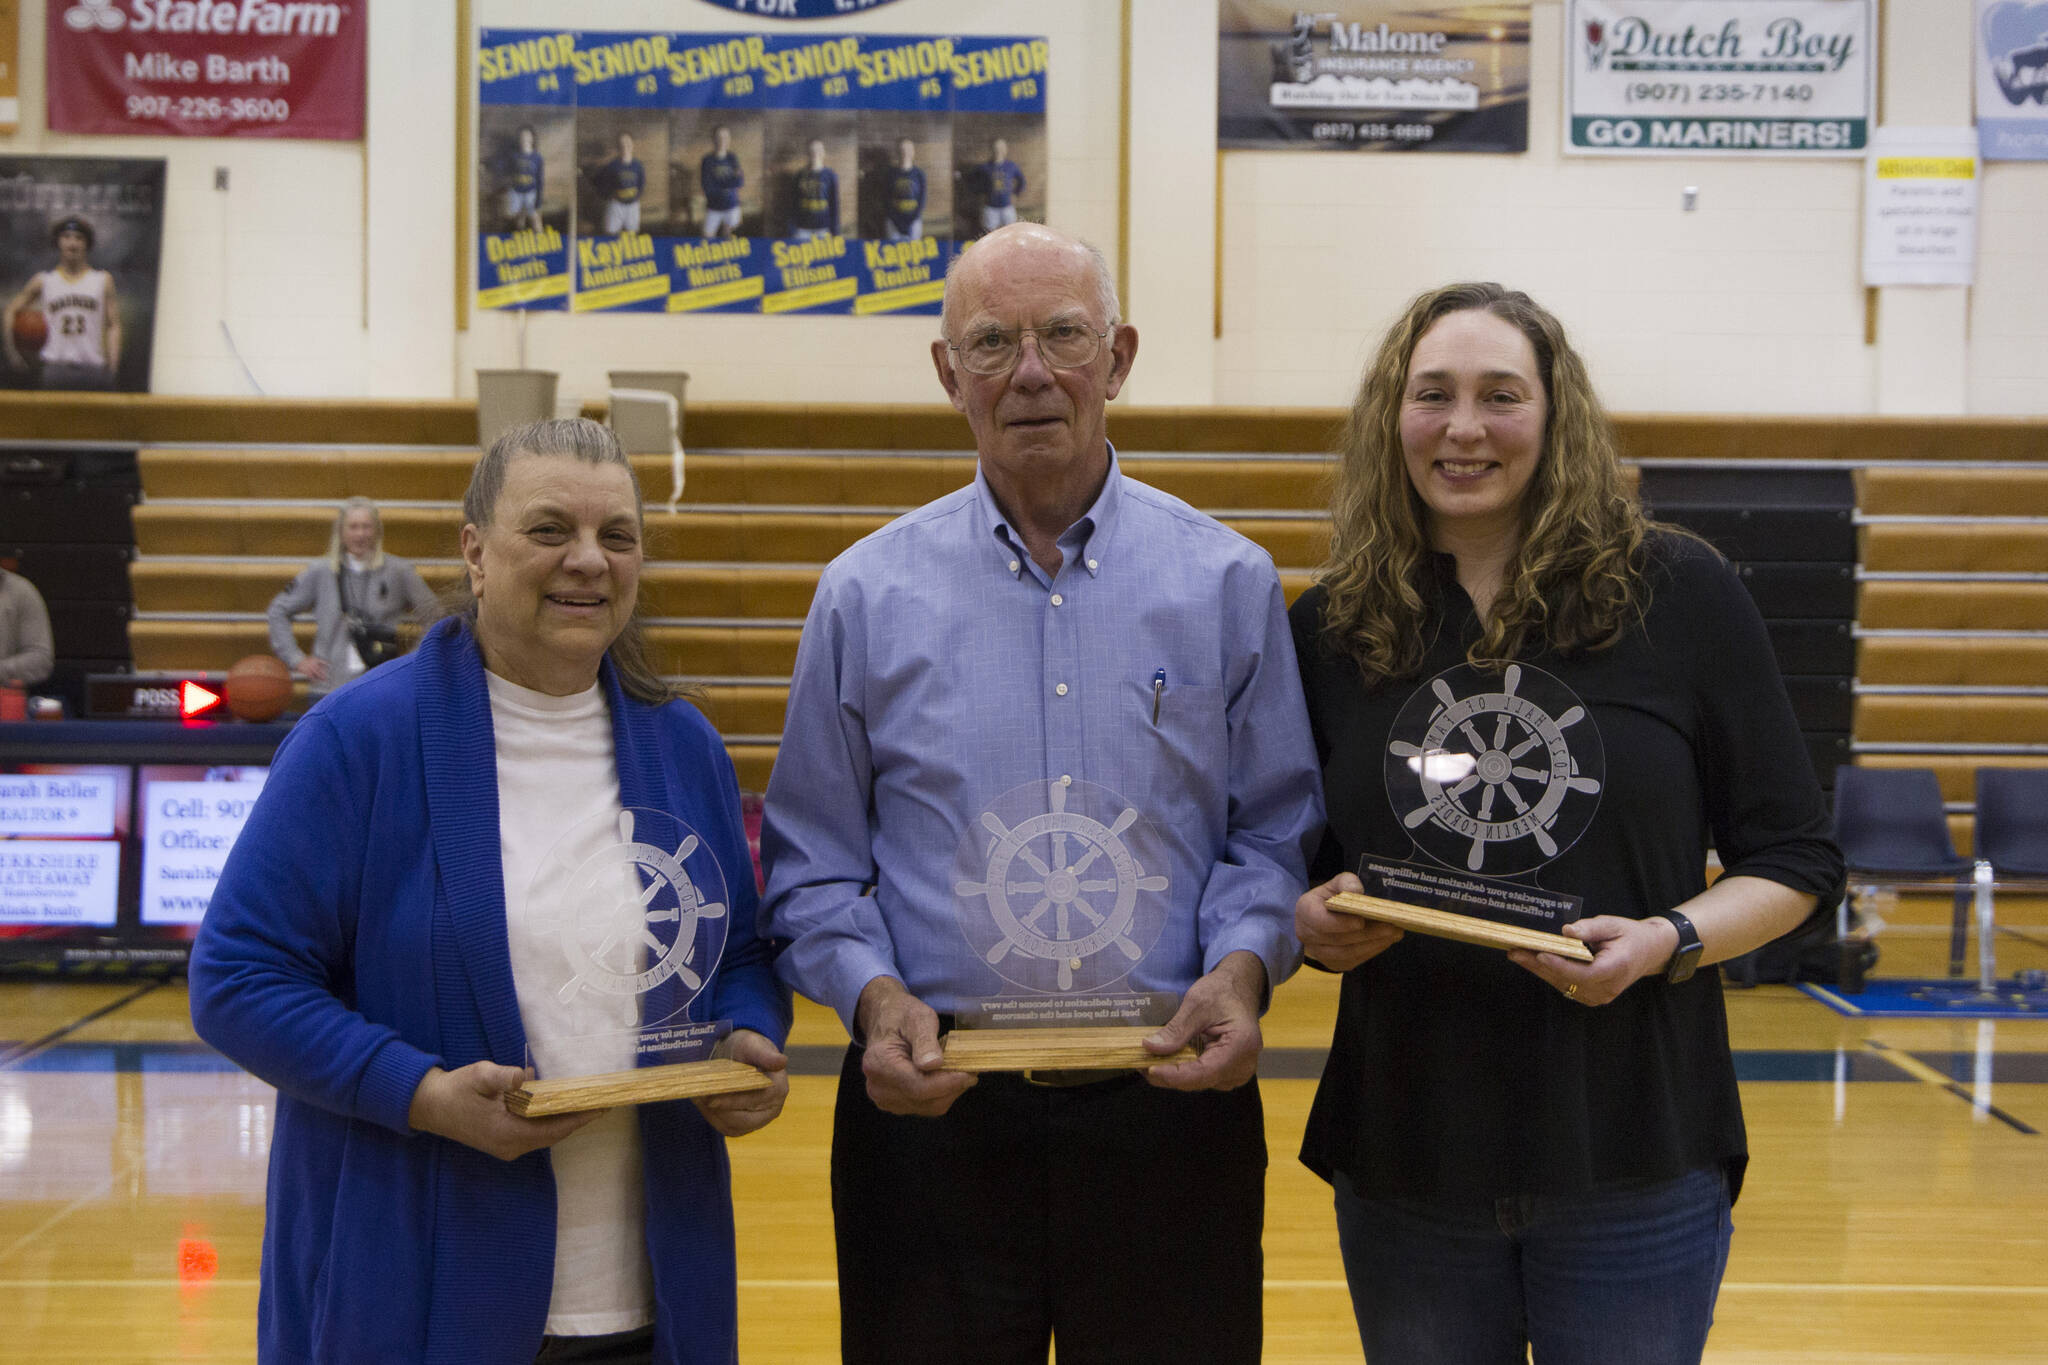 Anita Harry, Merlin Cordes and Corise Story were inducted into the Alaska School Activities Association Hall of Fame Friday night during the Sons of the American Legion Homer Winter Carnival basketball tournament. (Photo by Sarah Knapp/Homer News)